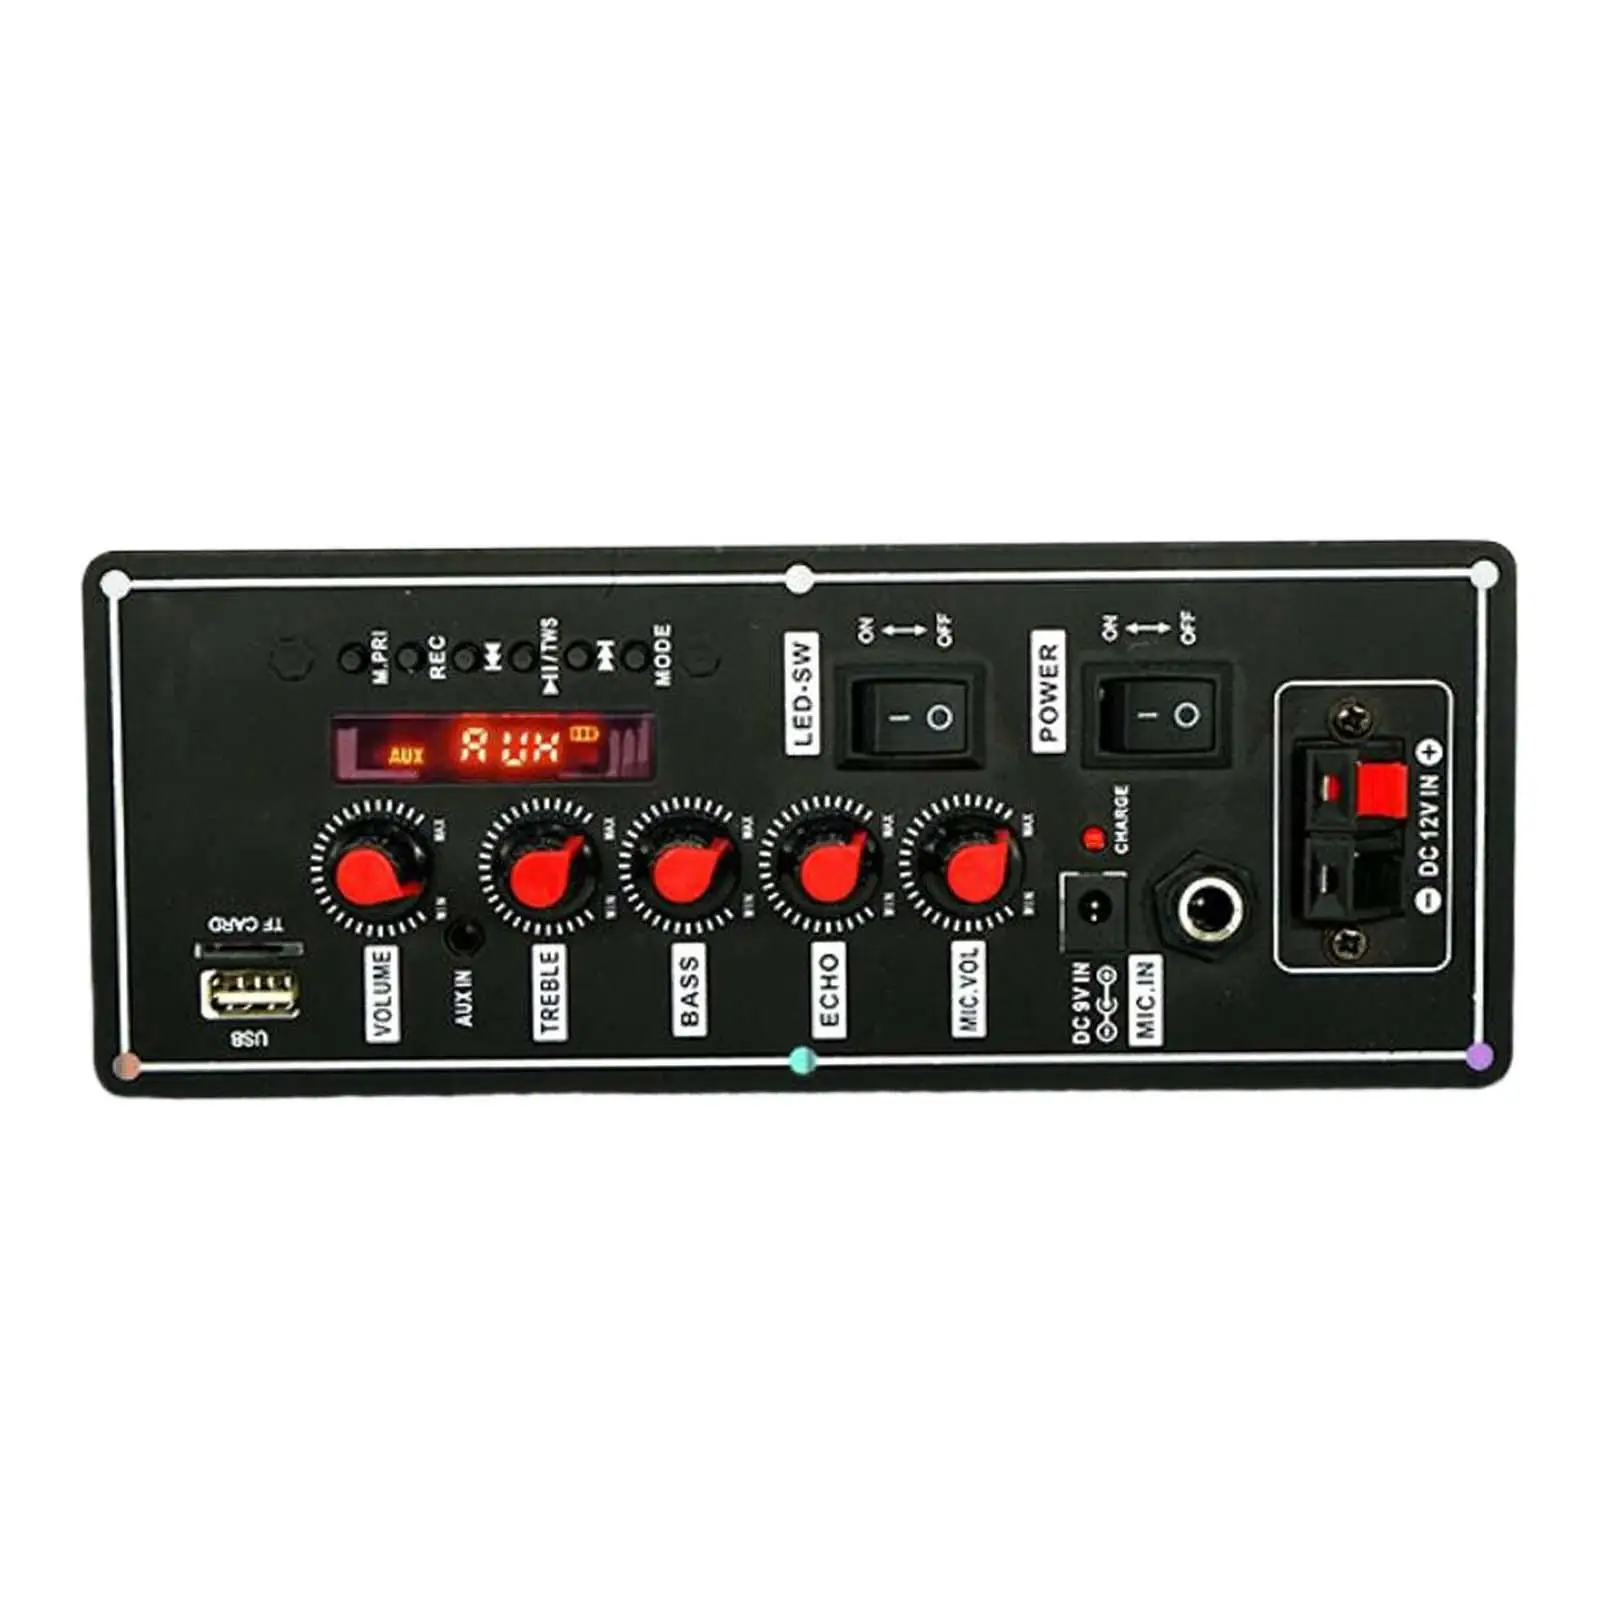 MP3 Decoder Player Module Button Control 2x10W Support MP3/WMA/WAV/flac/ape Audio Decode Board for Speaker or Other Appliances